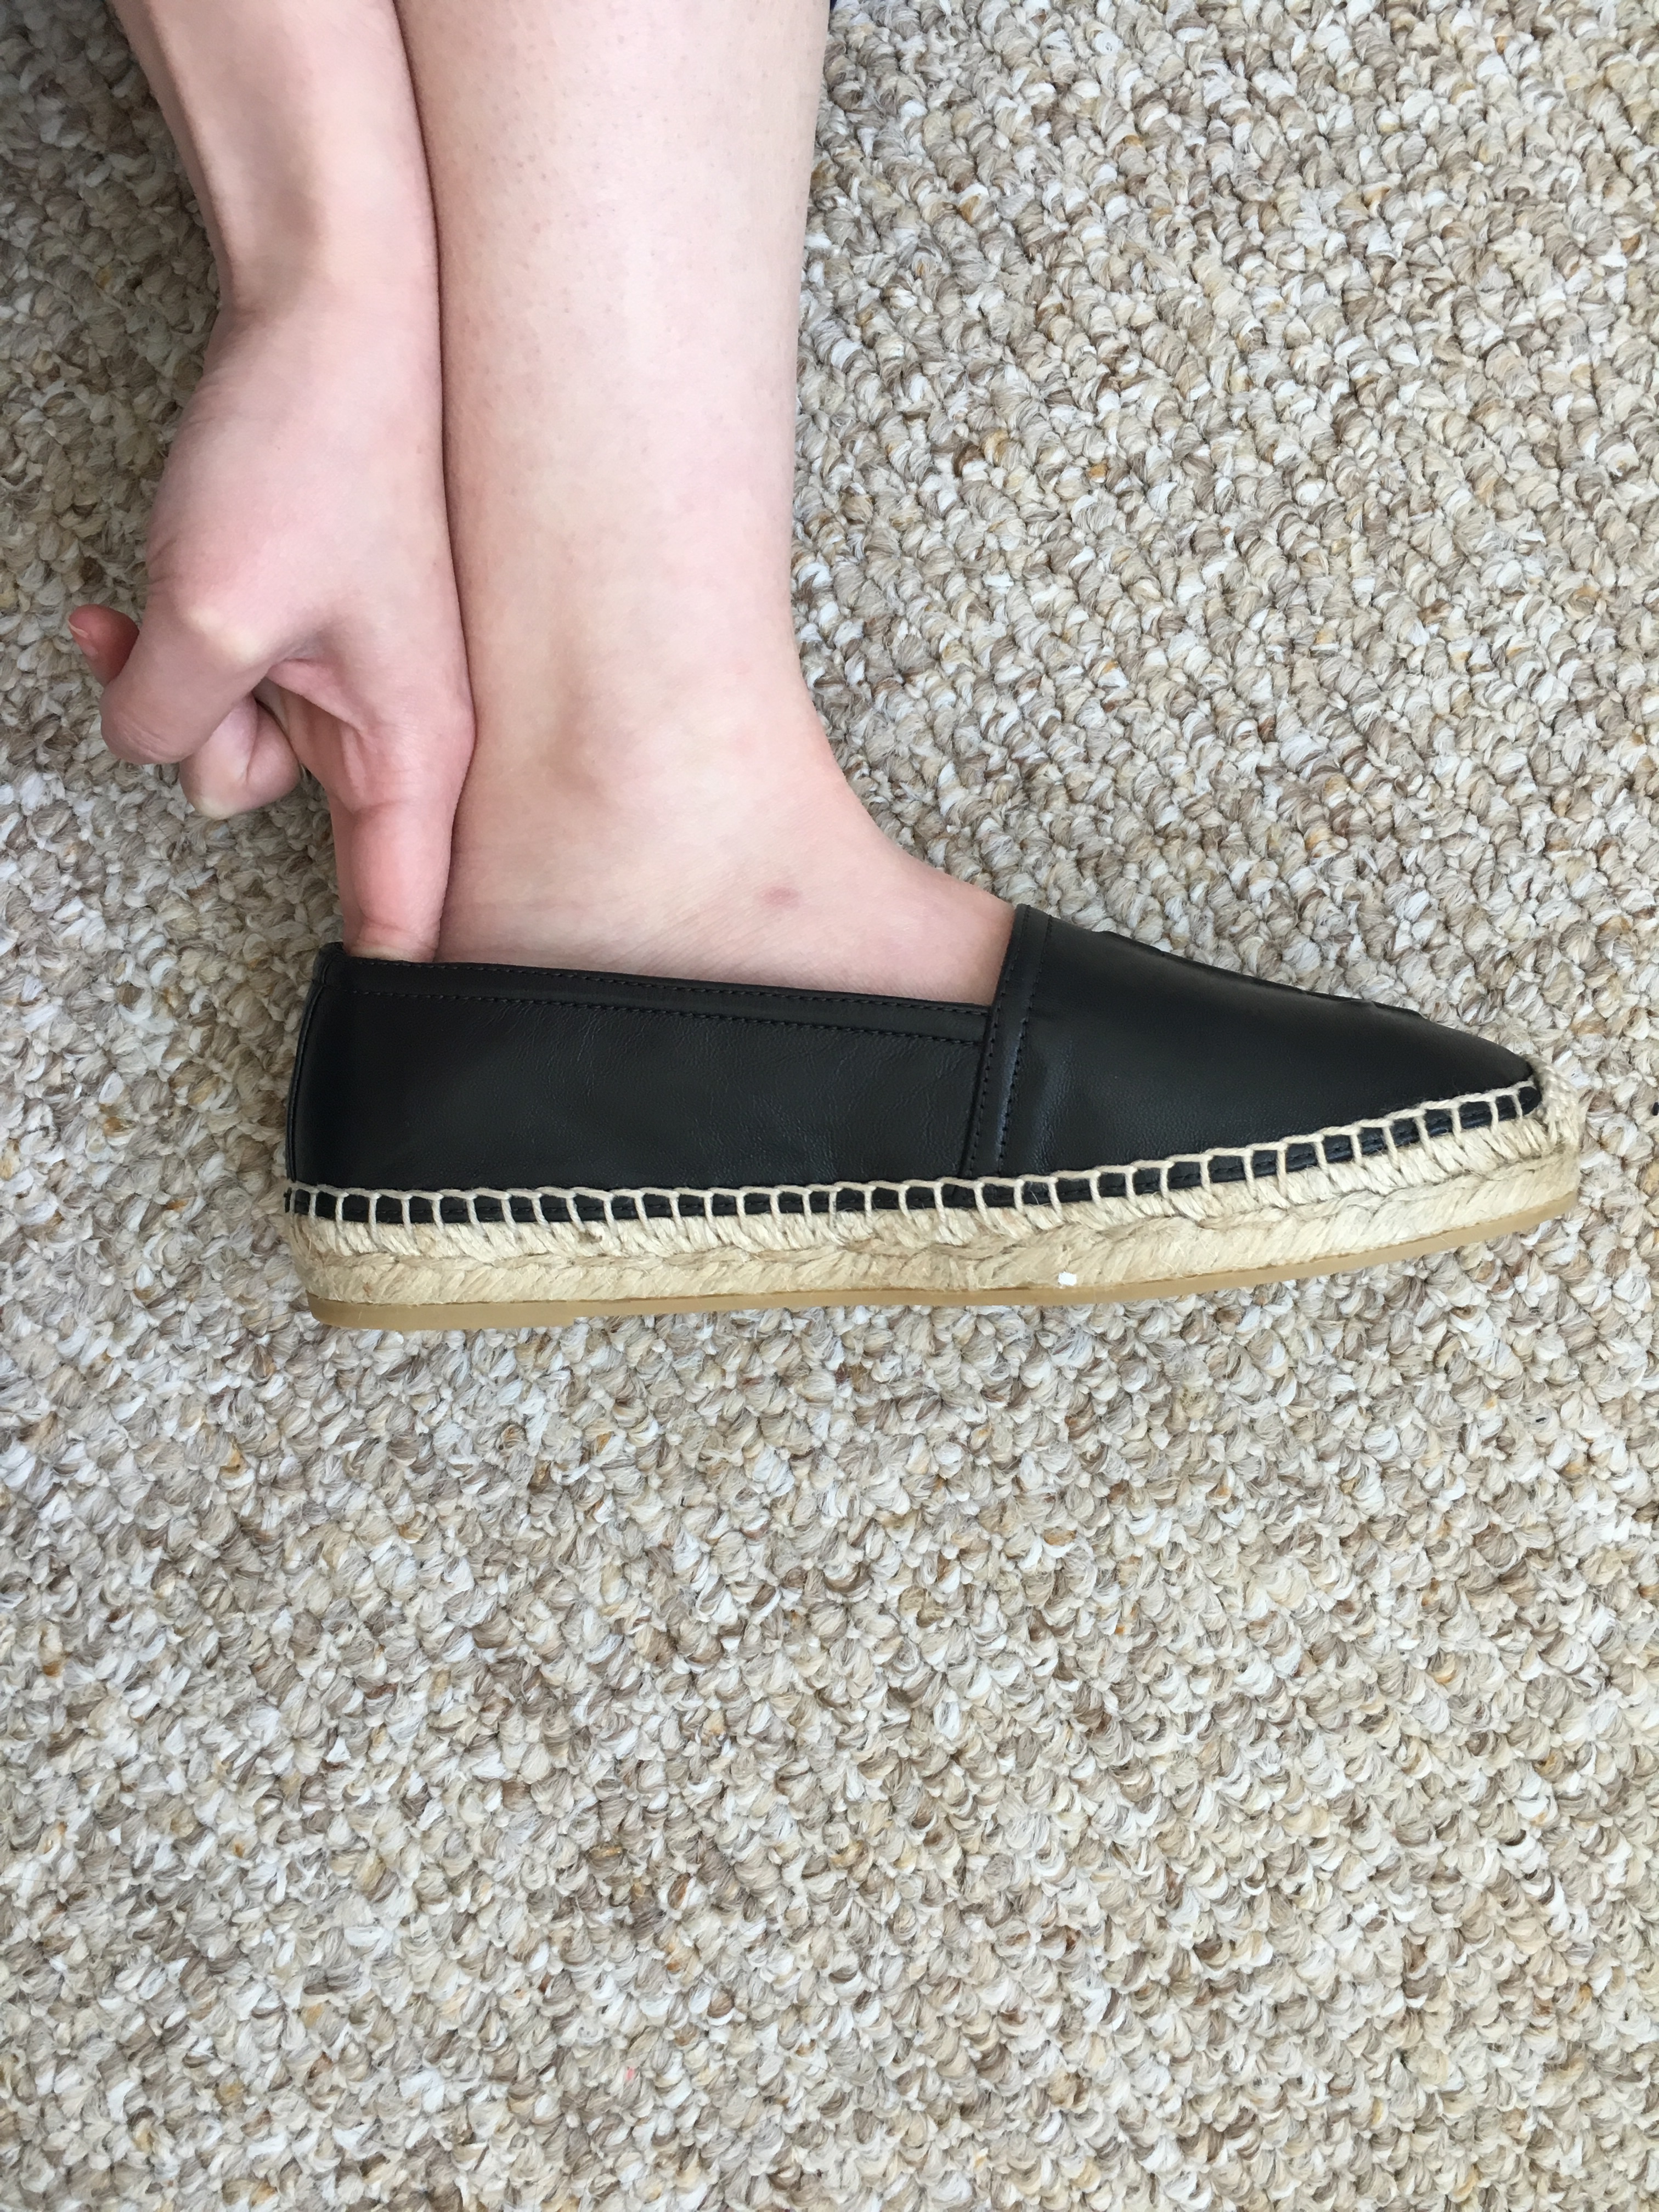 Bought YSL embossed leather espadrilles from reebonz and they're faulty?